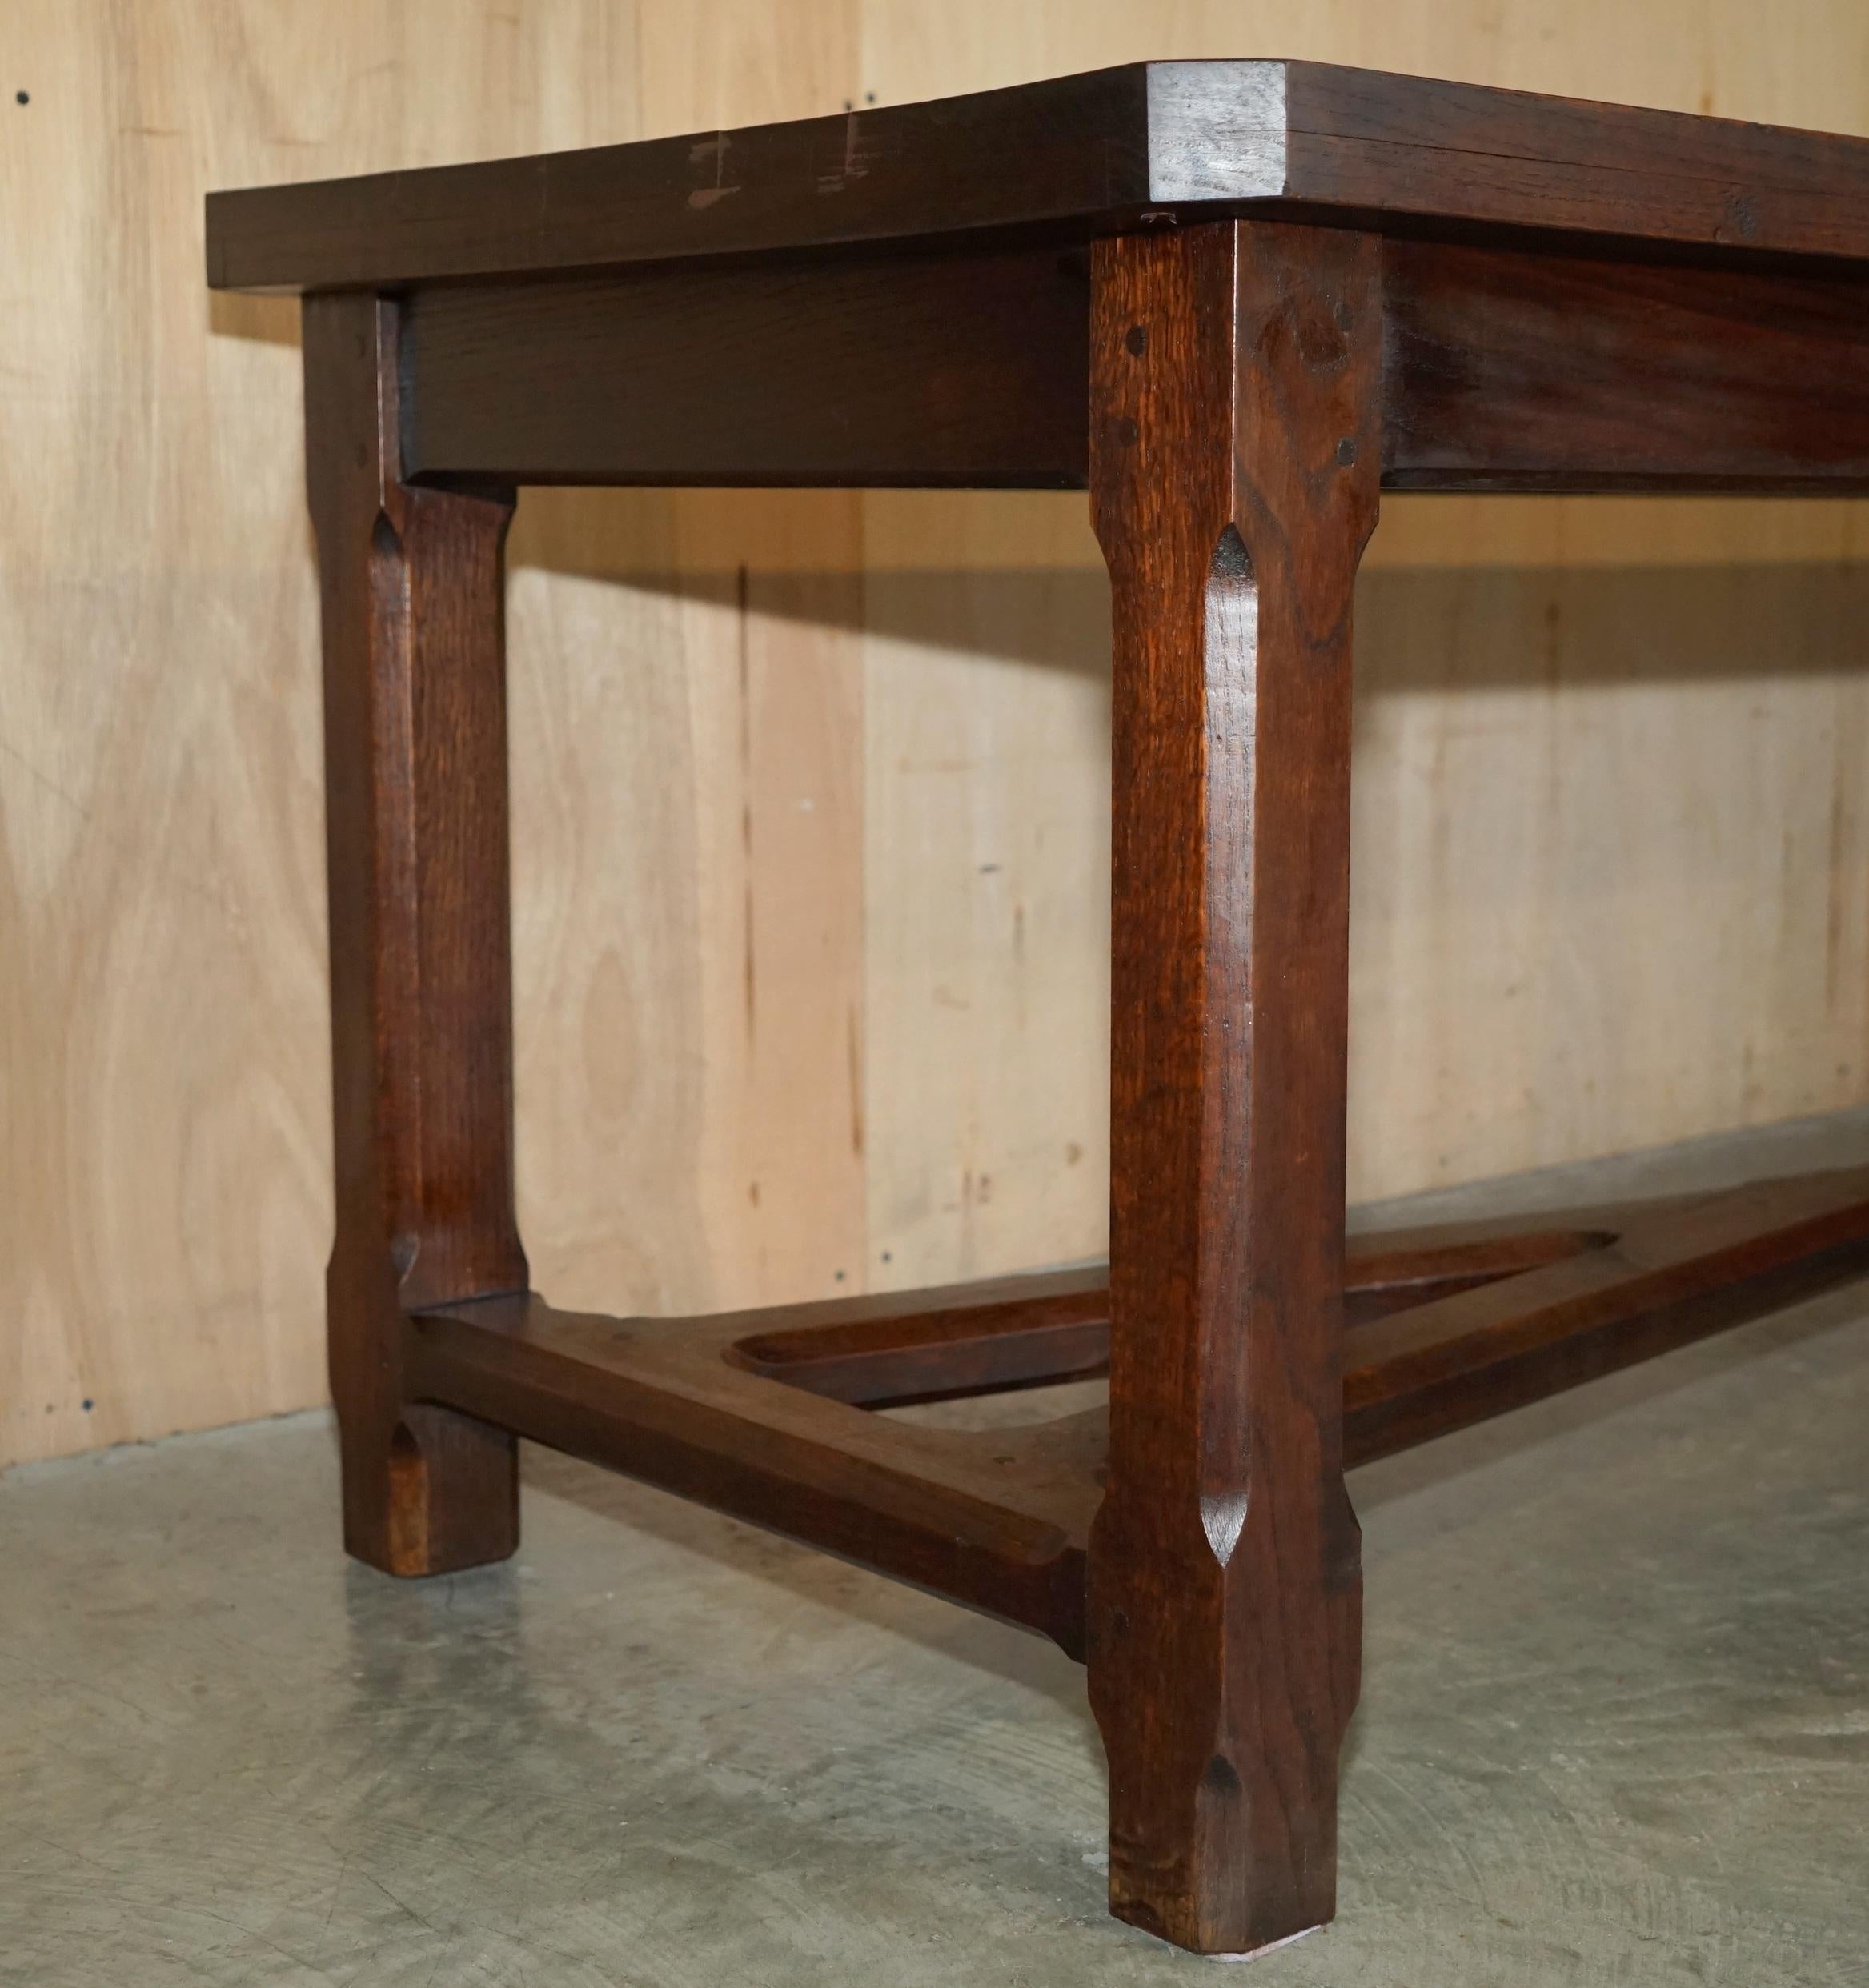 Hand-Crafted 19TH CENTURY FRENCH OAK REFECTORY HAYRAKE DiNING TABLE WITH STUNNING BASE For Sale